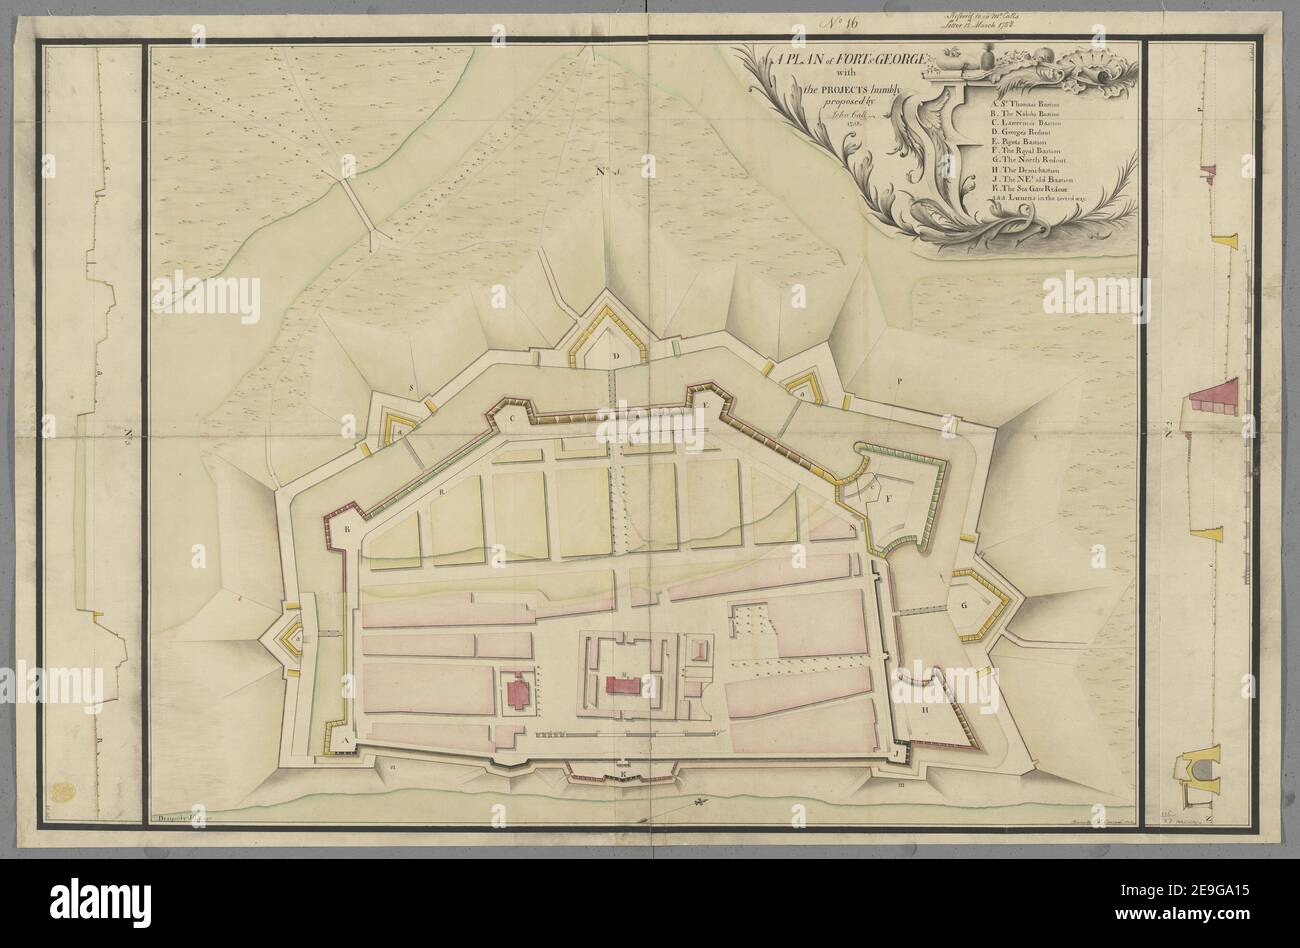 A plan of Fort St. George, with the projects humbly proposed by John Call, 1758 drawn by F.L. Conradi, on a scale of 100 feet to an inch, with profiles on a scale of 18 feet to an inch. Map information:  Title: A plan of Fort St. George, with the projects humbly proposed by John Call, 1758; drawn by F.L. Conradi, on a scale of 100 feet to an inch, with profiles on a scale of 18 feet to an inch. 115.77. Date of publication: 1758.  Item type: Ms. 3 f. 4 in. x 2 f. 2 in.  Former owner: George III, King of Great Britain, 1738-1820 Stock Photo